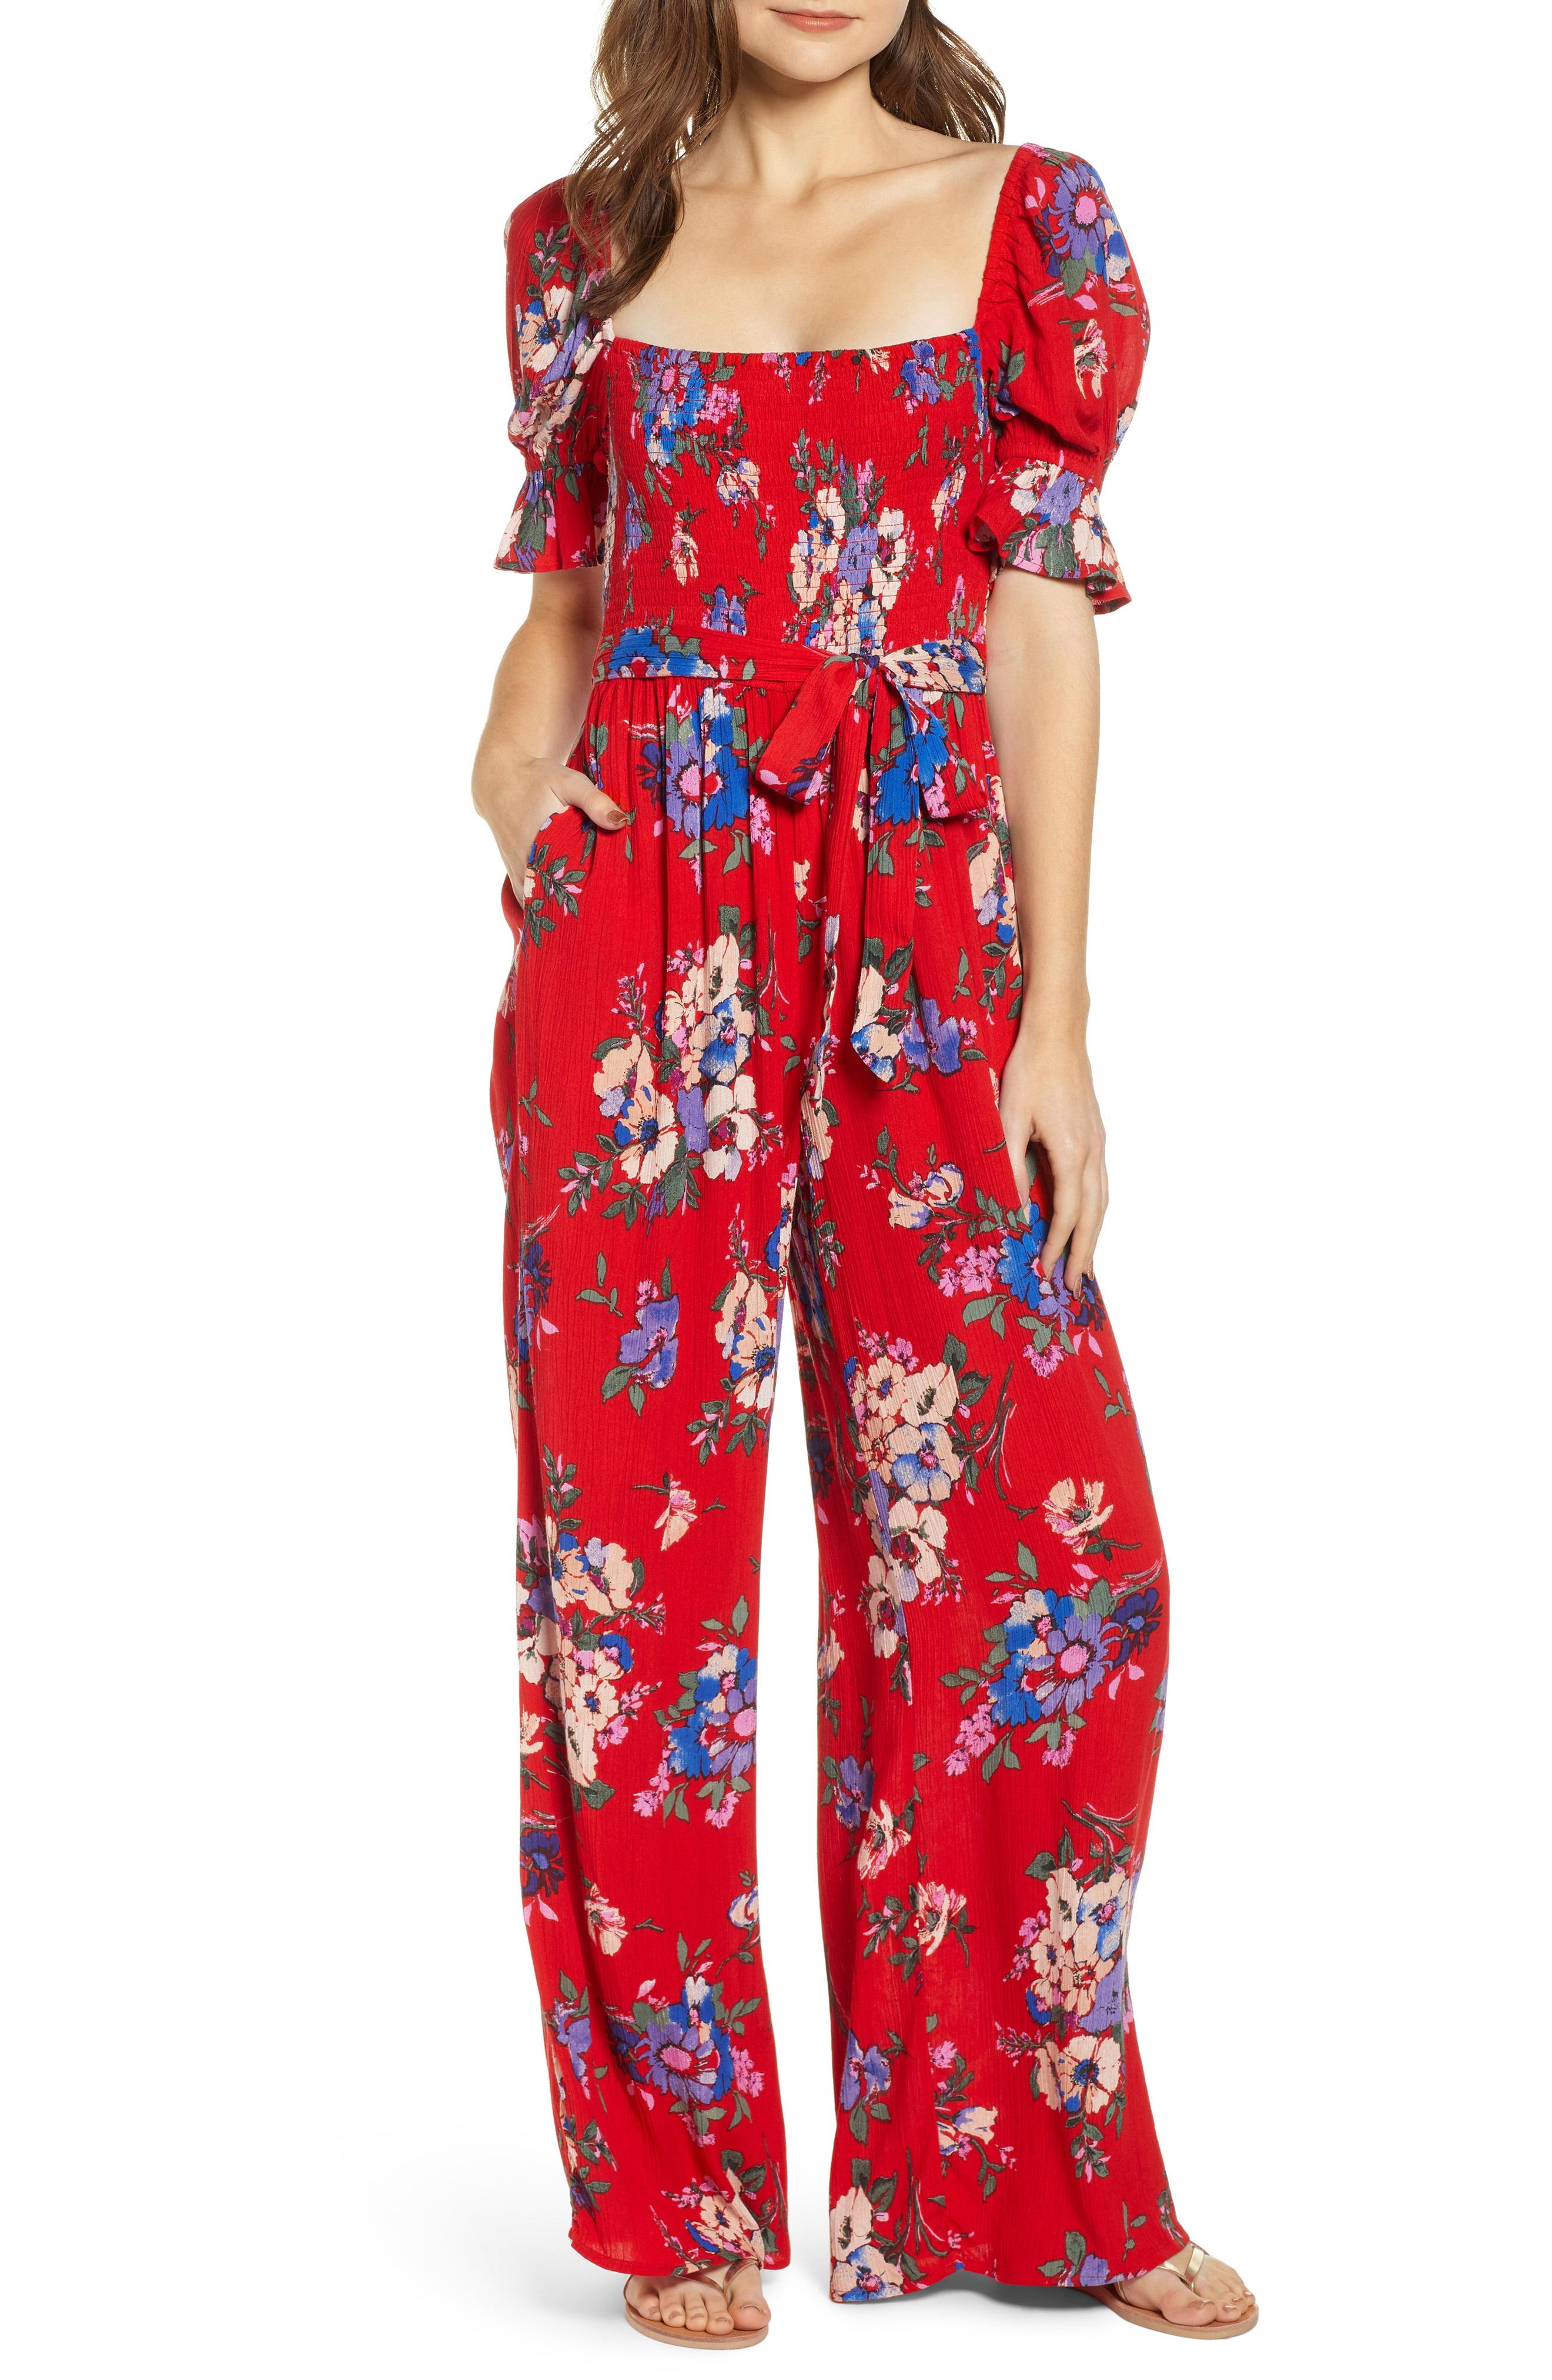 Lyst - Band Of Gypsies Manchester Smocked Jumpsuit in Red